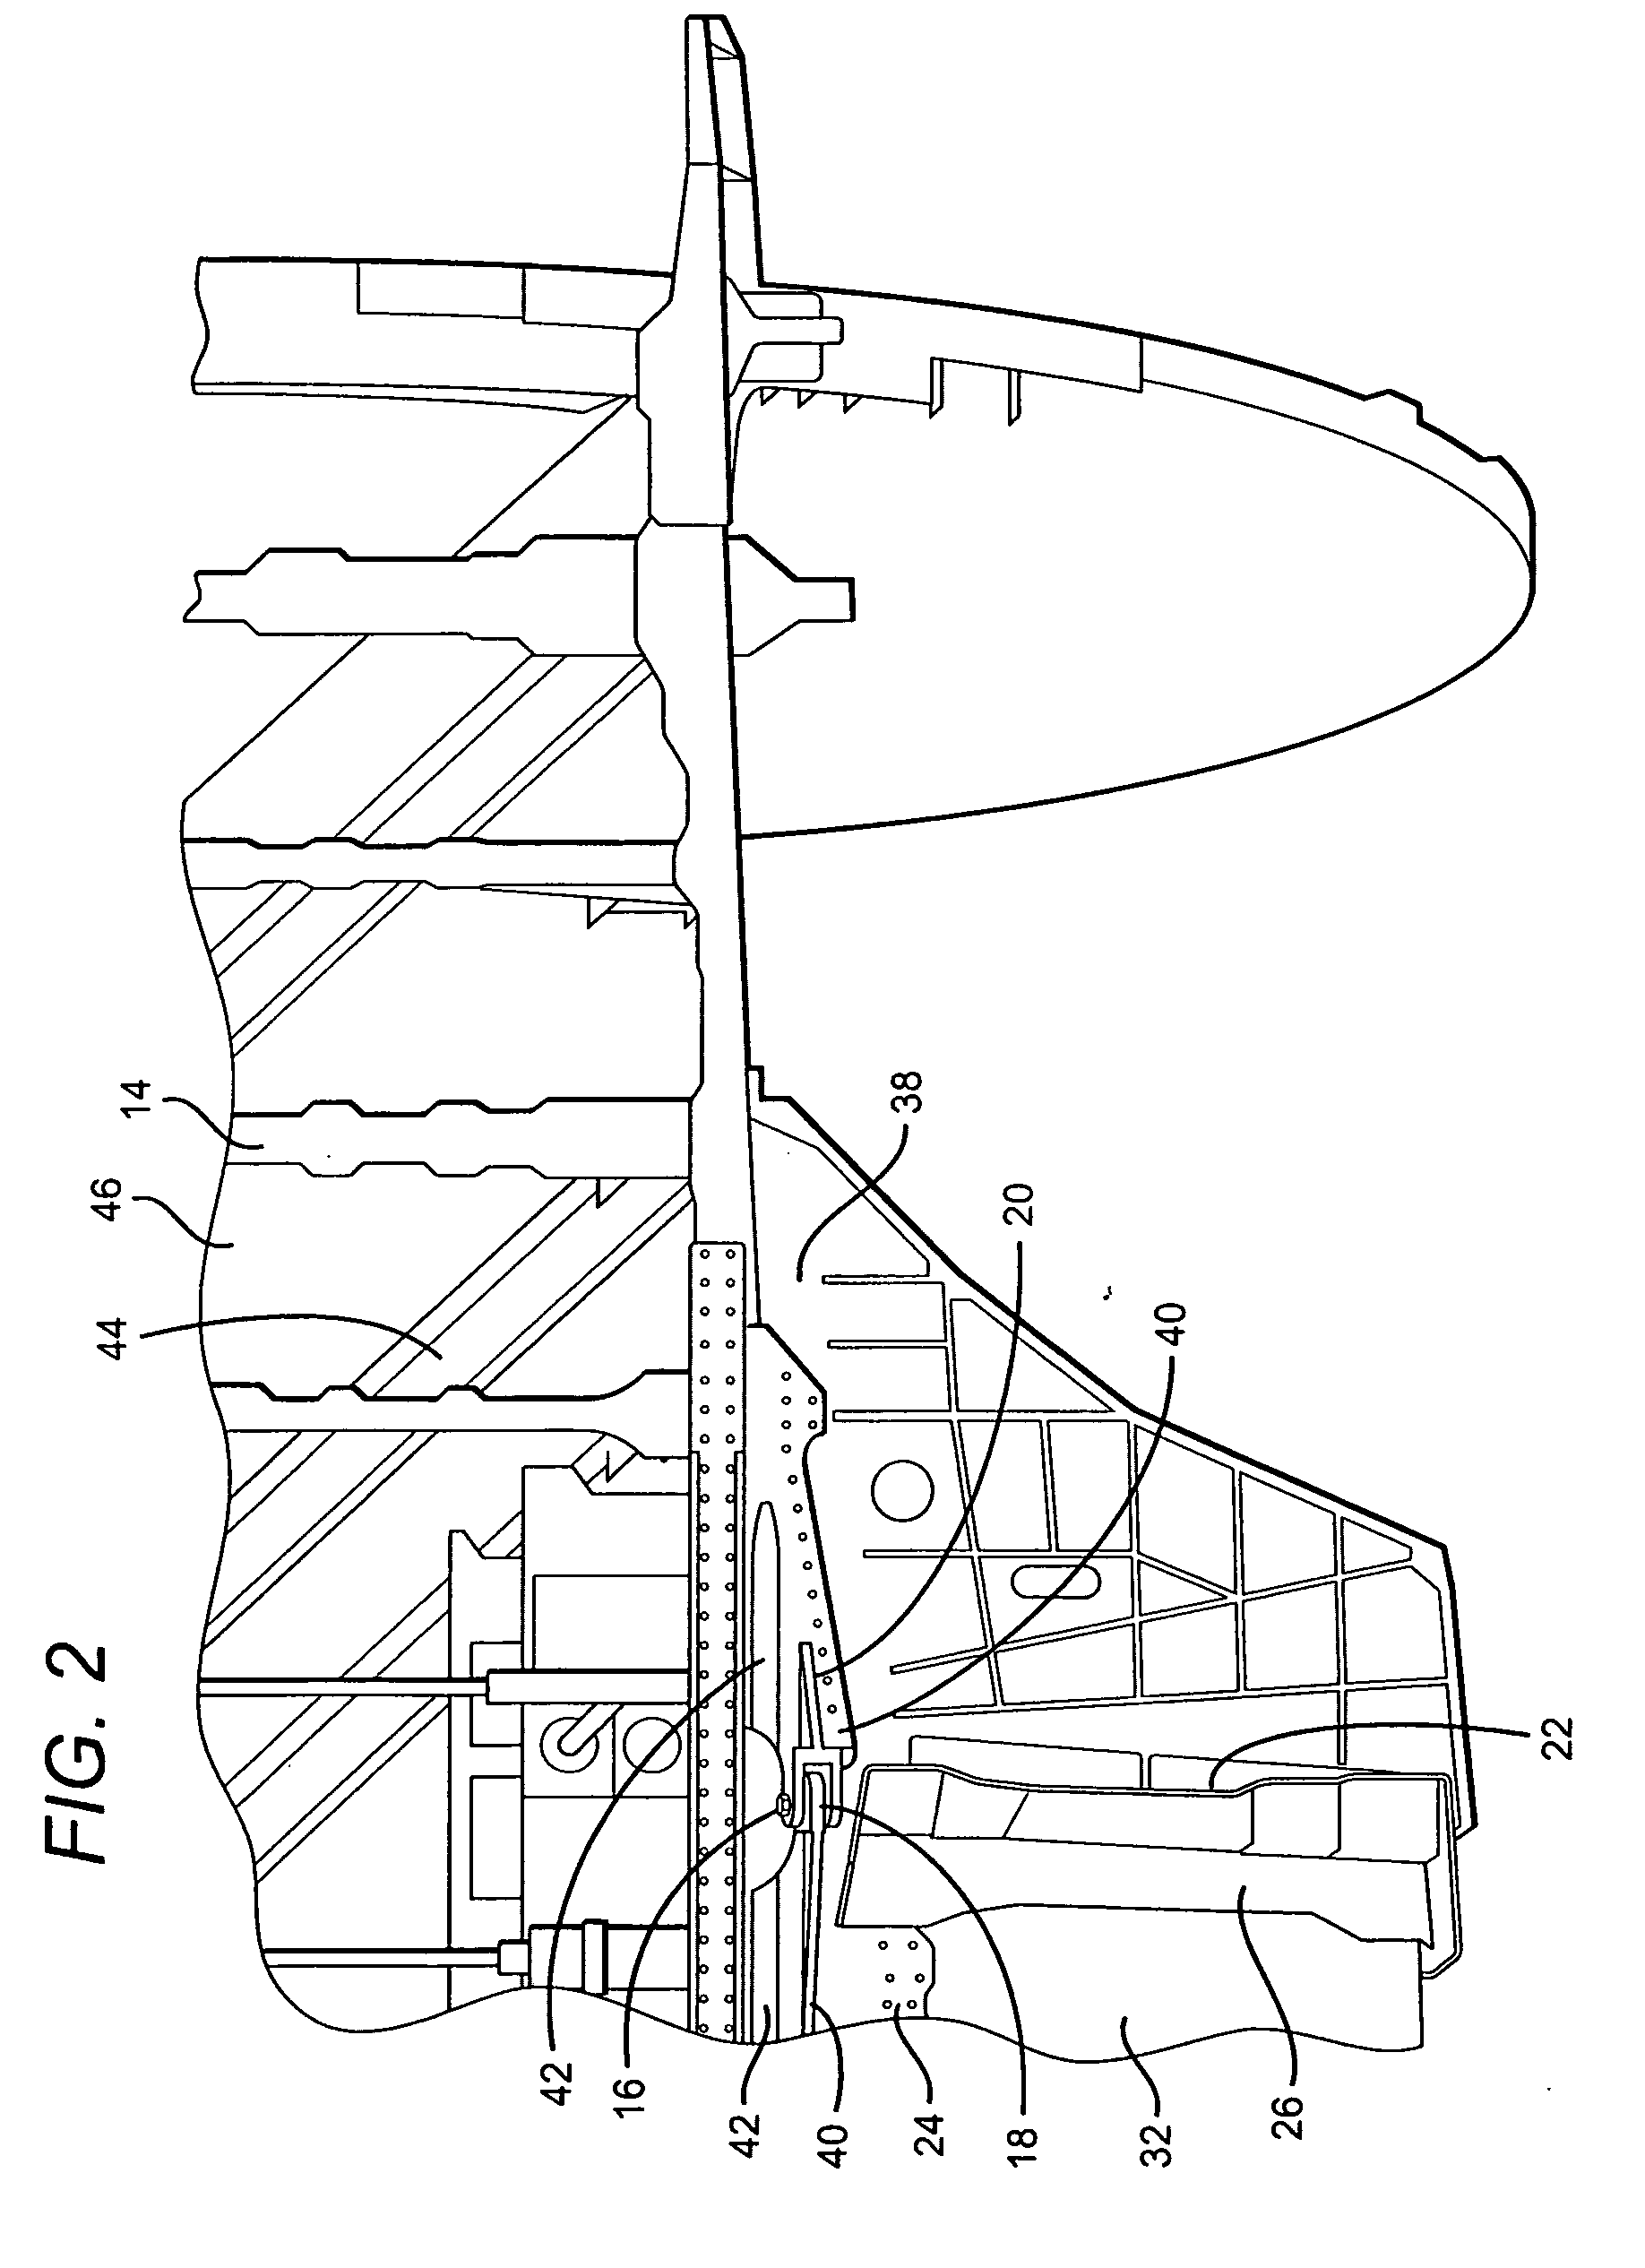 Trapezoidal panel pin joint allowing free deflection between fuselage and wing